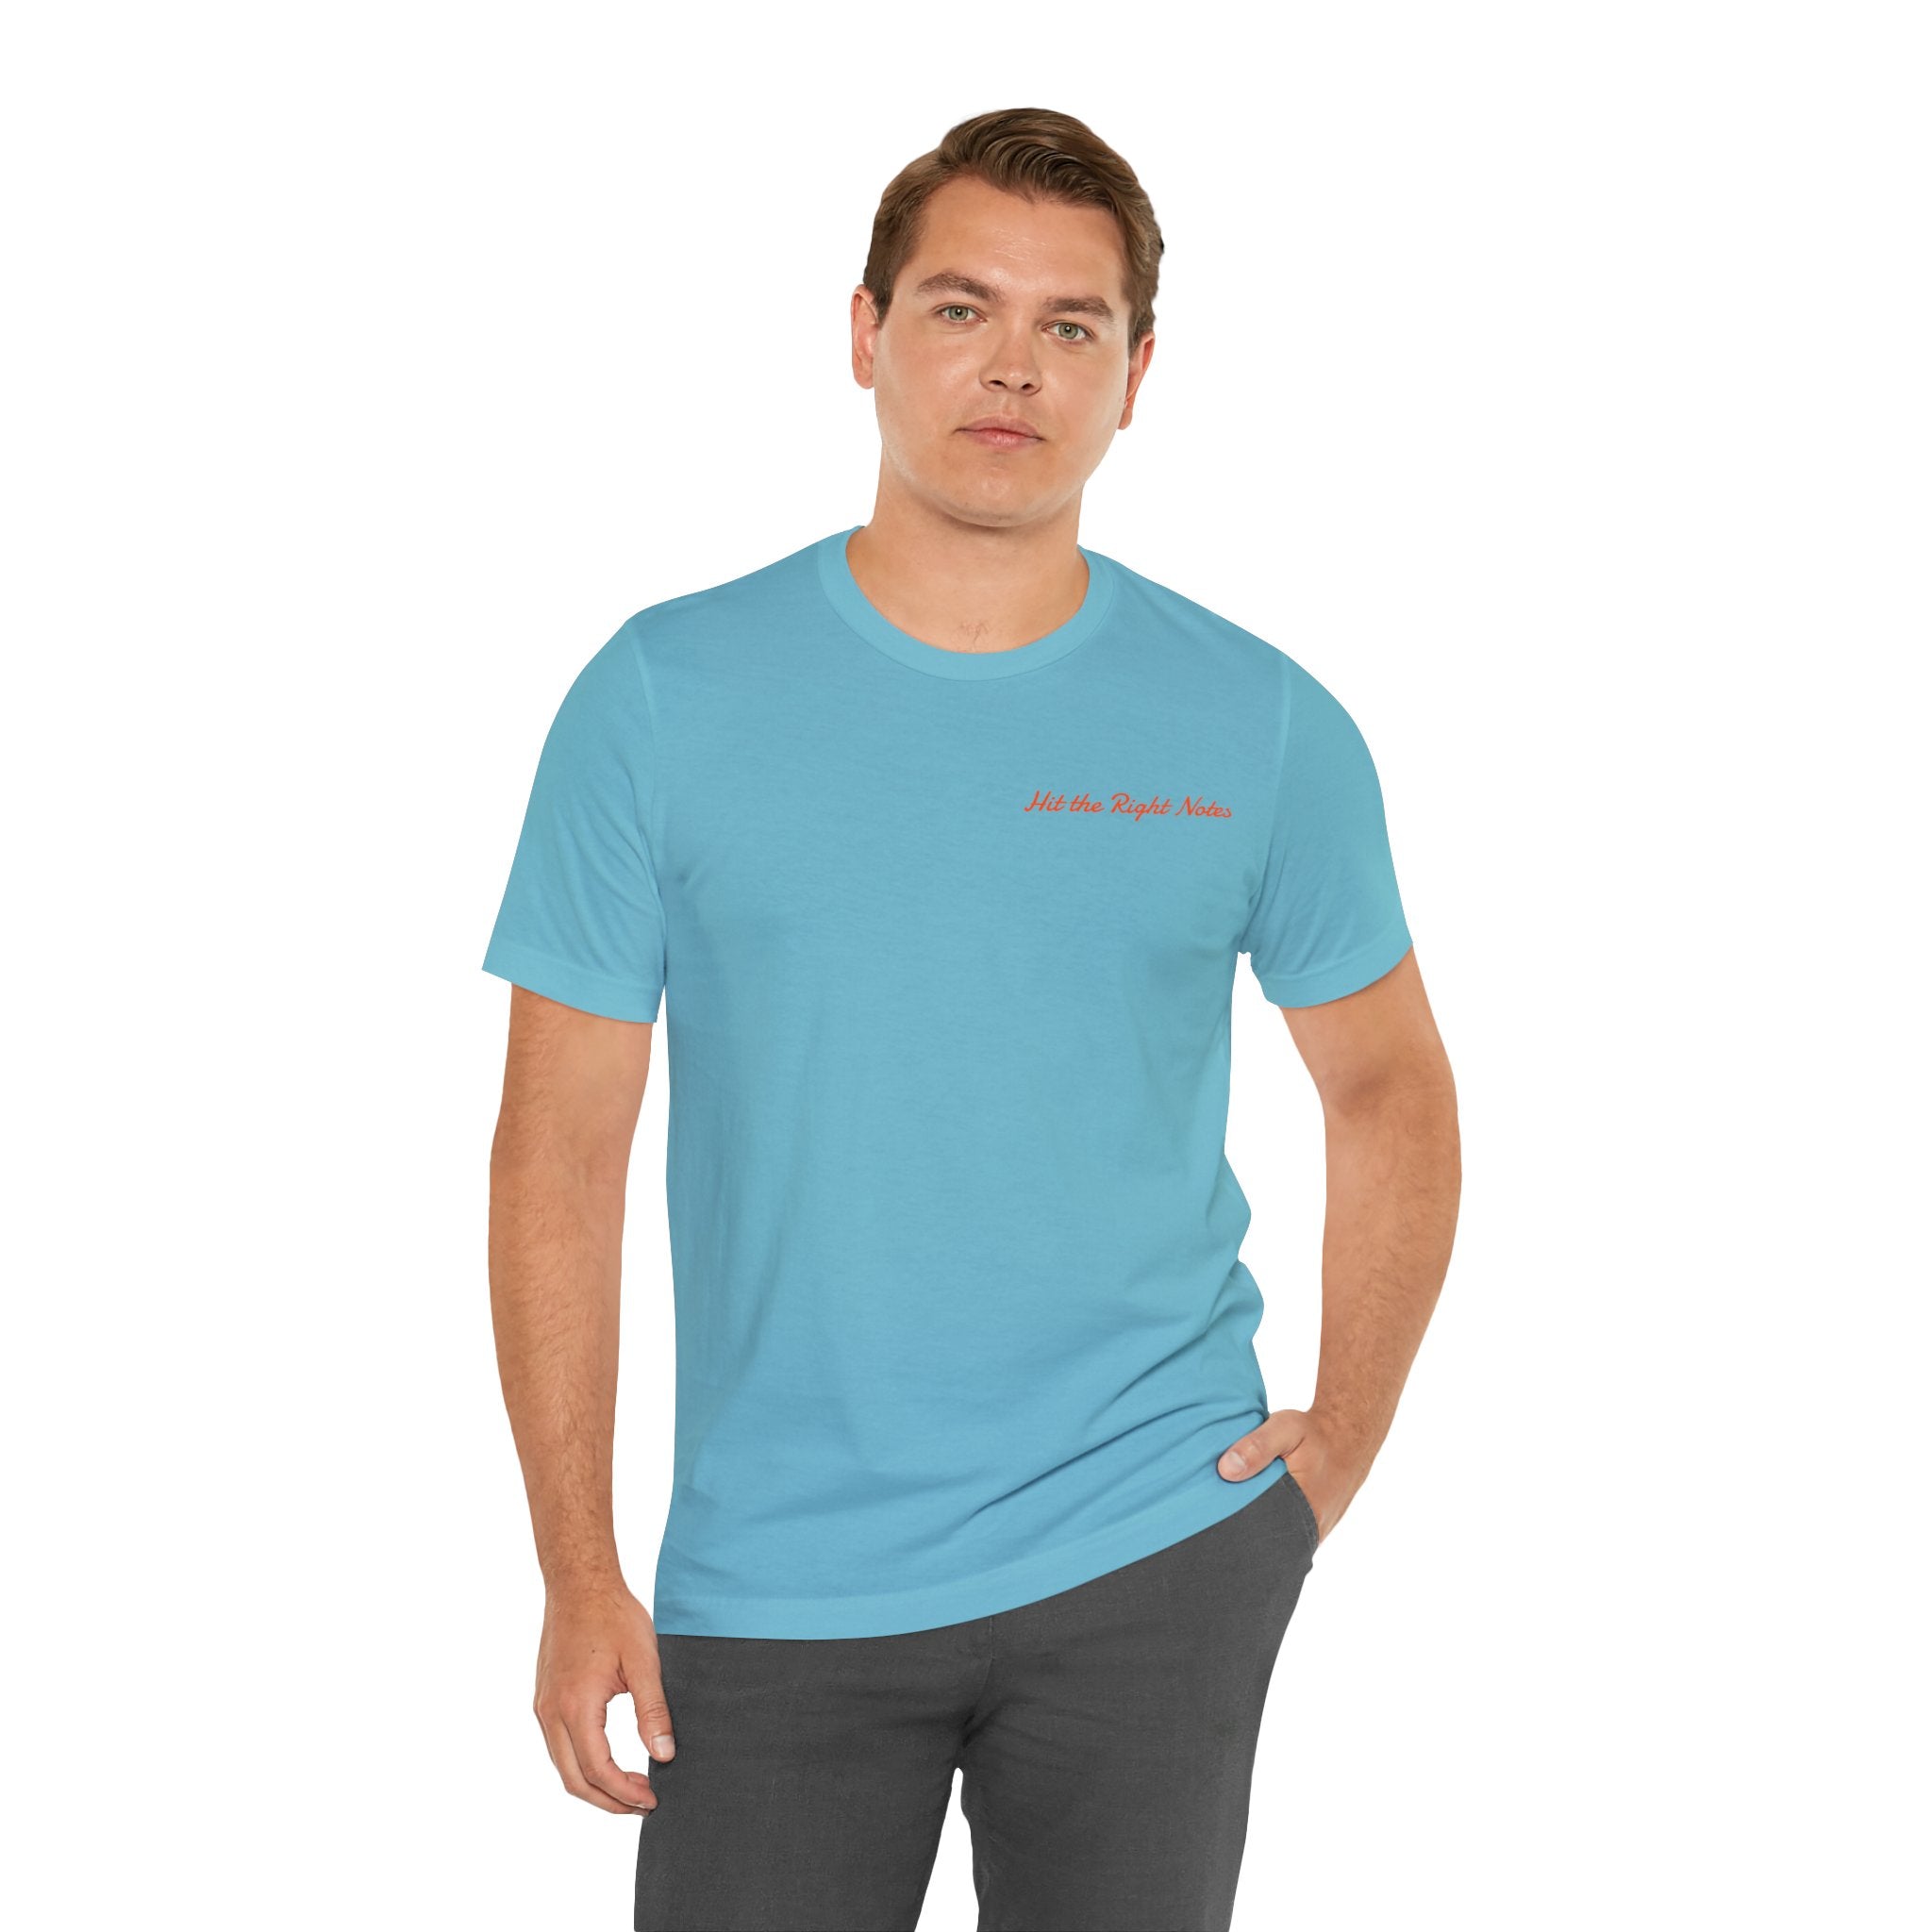 Hit the Right Notes Jersey Tee - Bella+Canvas 3001 Turquoise Classic Tee Comfortable Tee Cotton T-Shirt Graphic Tee JerseyTee Statement Shirt T-shirt Tee Unisex Apparel T-Shirt 8887384956314162408_2048 Printify